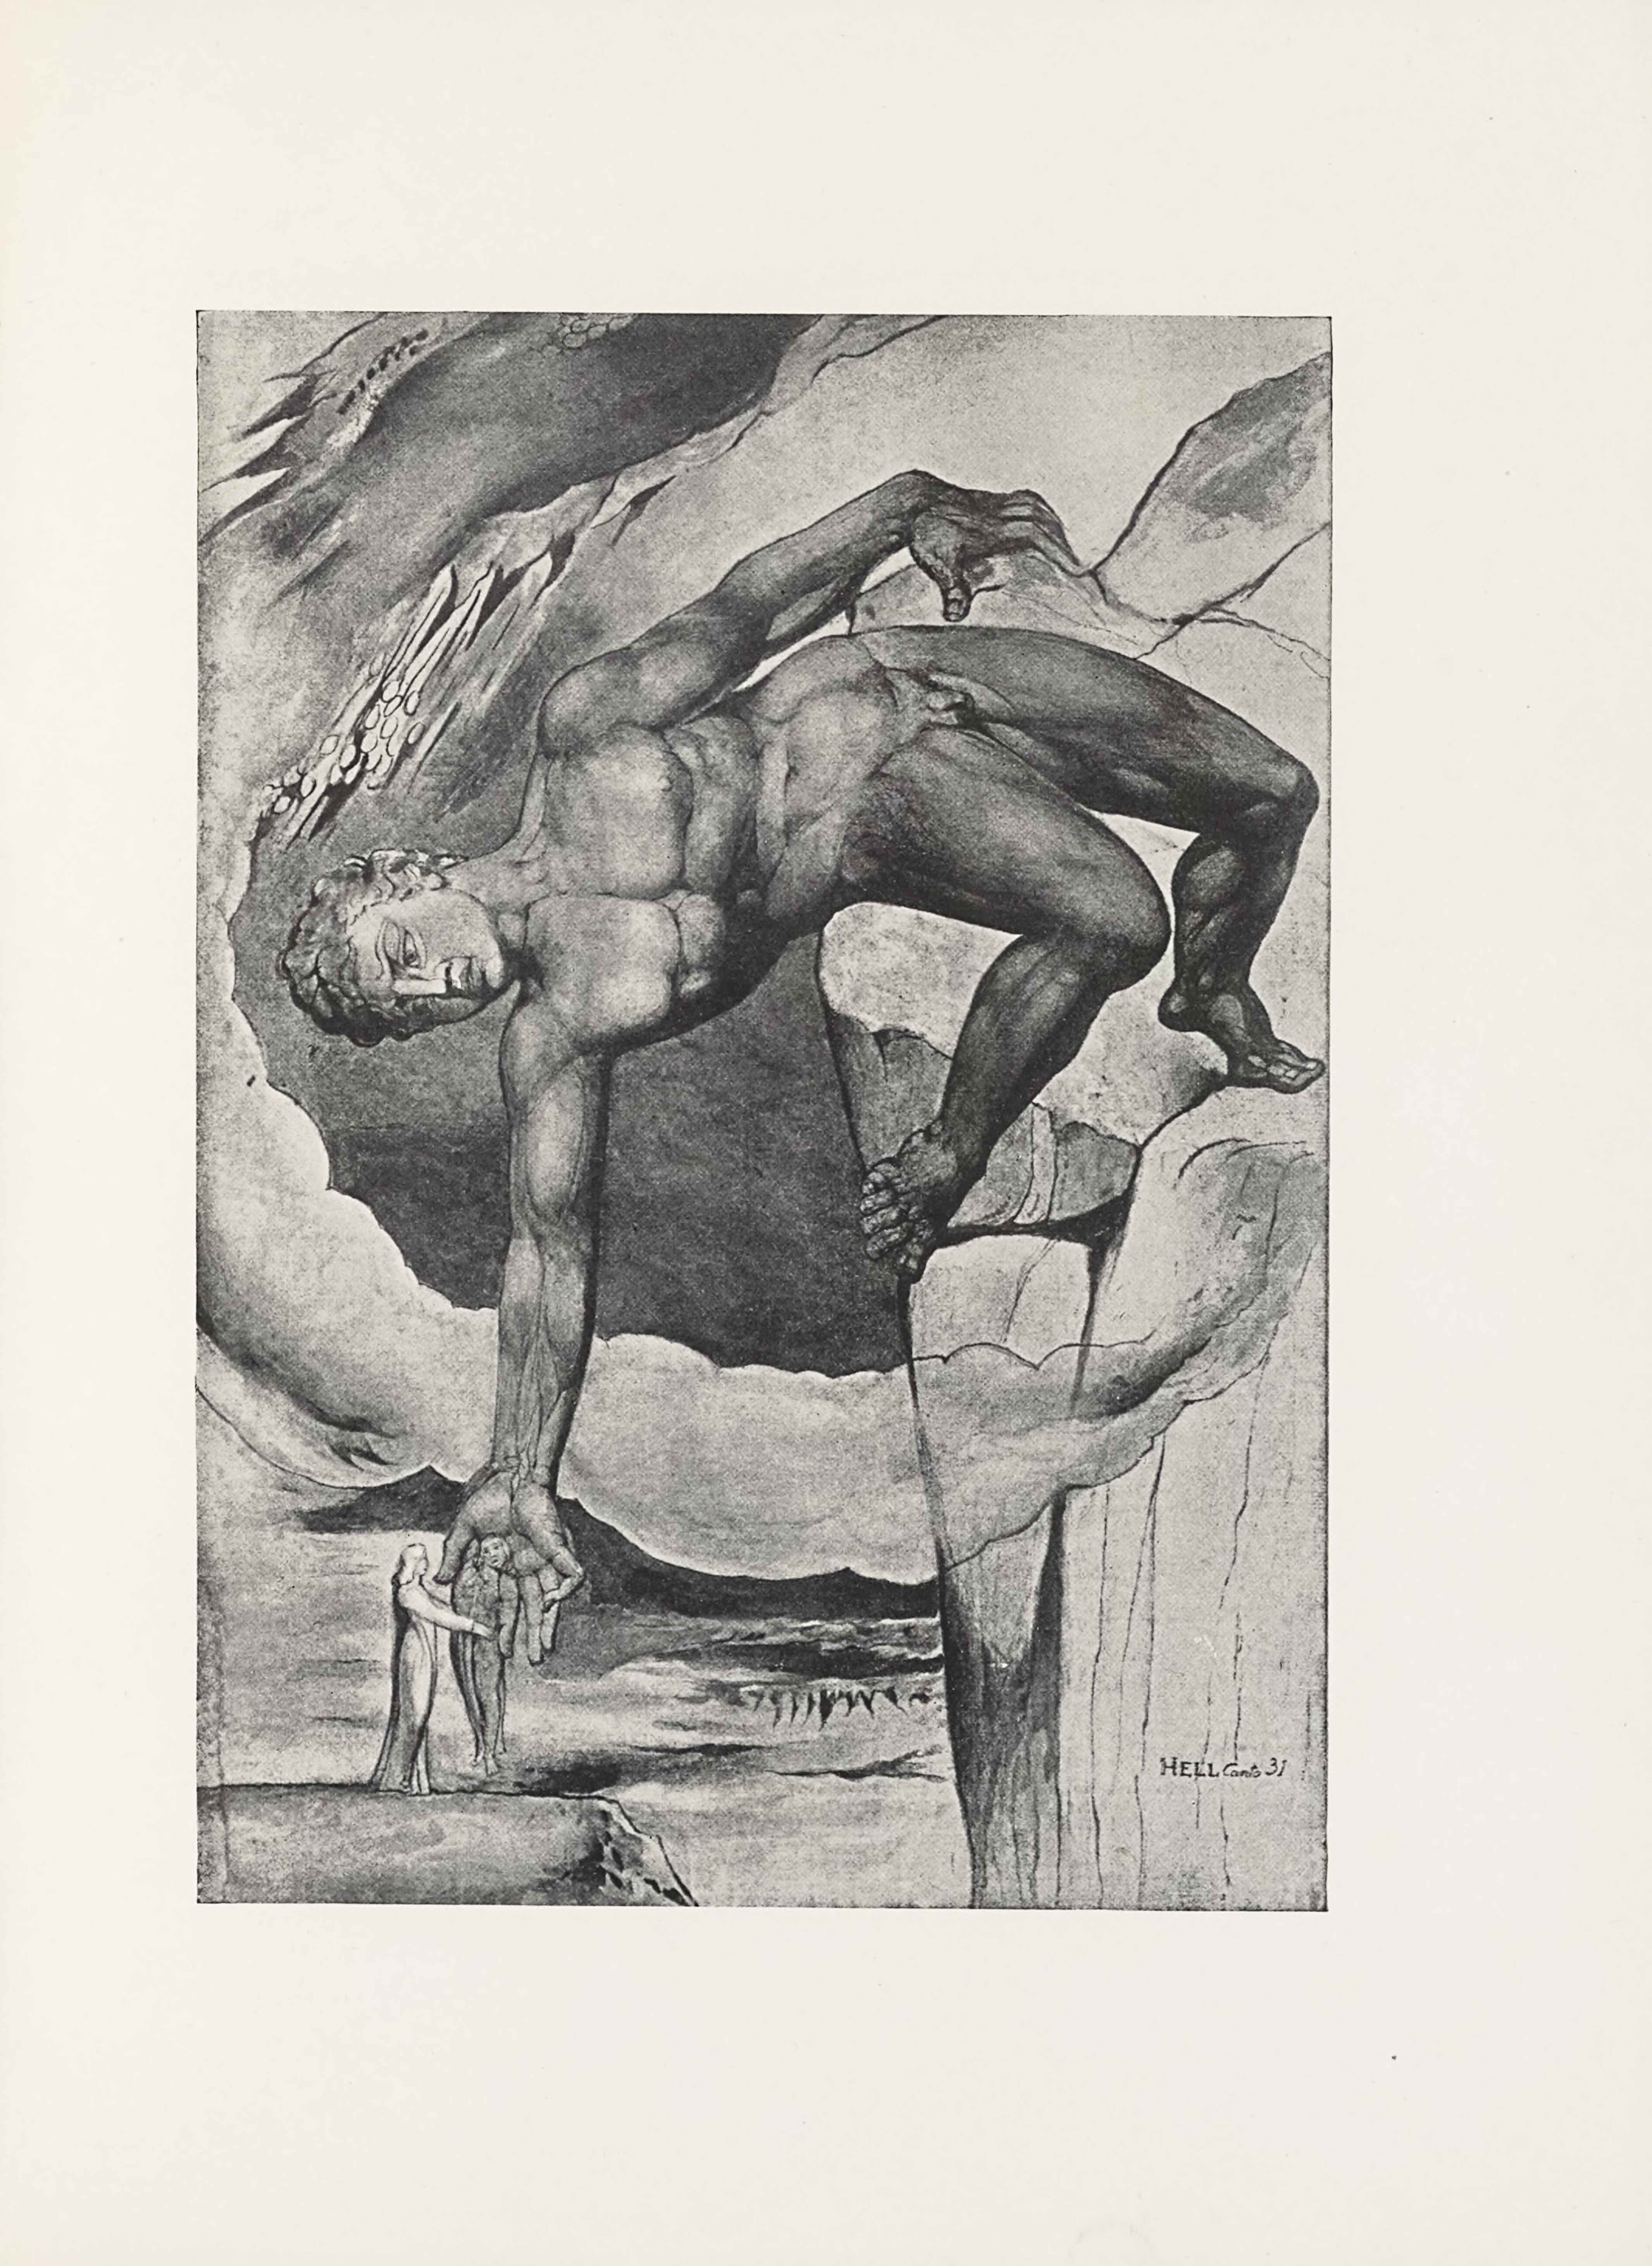 The half-tone reproduction of a water-colour by William Blake is in portrait orientation and is an illustration of a scene in Dante’s Inferno. The image shows the classical Giant, Anteus in Hell, leaning backwards in an impossibly balanced posture on one toe, with one hand on a high rocky outcropping, reaching down to set a figure (Dante) down on a small ledge (the Verge of Cocytus) below, where another figure (Virgil) stands waiting. The naked giant fills the upper centre of the picture plane. In the foreground and the bottom left corner, the small rocky ledge appears just visible within the frame, extending out to almost the halfway point of the image width. Atop the small ledge stands a man facing to the right of the page and visible in profile, wearing a long robe, with his arms extended out in front, reaching toward the man being set down by the Giant (Dante). He appears resting in the gigantic hand of Antaeus. In the bottom right corner the tall rocky outcropping begins, extending to a third of the image width and nearly the entirety of its height. The outcropping has vertical lines drawn to show pieces of rock that are shifted out of line with the structure. Halfway up the height of the outcropping a stream of mist or cloud extends to the left of the page before looping up and back to the right side, leaving a semi-circle of cloud around the exterior of Giant. In the distance between the two rocky ledges lies a barren surface of land, with cracks delineating the flatness. The gigantic man takes up the rest of the space on the upper page. He has his left foot rested on the high rocky outcropping, with his right foot hanging off of the edge closest to the viewer. The rest of his body is leaned back horizontal to the ground. The man’s upper body is twisted to extend his right arm down to hold the figure below. His chest faces the viewer and his left arm clings to a piece of rock on the top edge of the high outcropping. His head is turned to face down below him, and he has a crease between his eyebrows. He has slightly downturned lips, and his nose is scrunched up. He has short wavy hair. He is extremely muscular a. The sky behind the scene is dark, almost black and the semi-circle cloud cuts through with its light colouring. In the bottom right corner is the text: “HELL [caps] Canto 31”